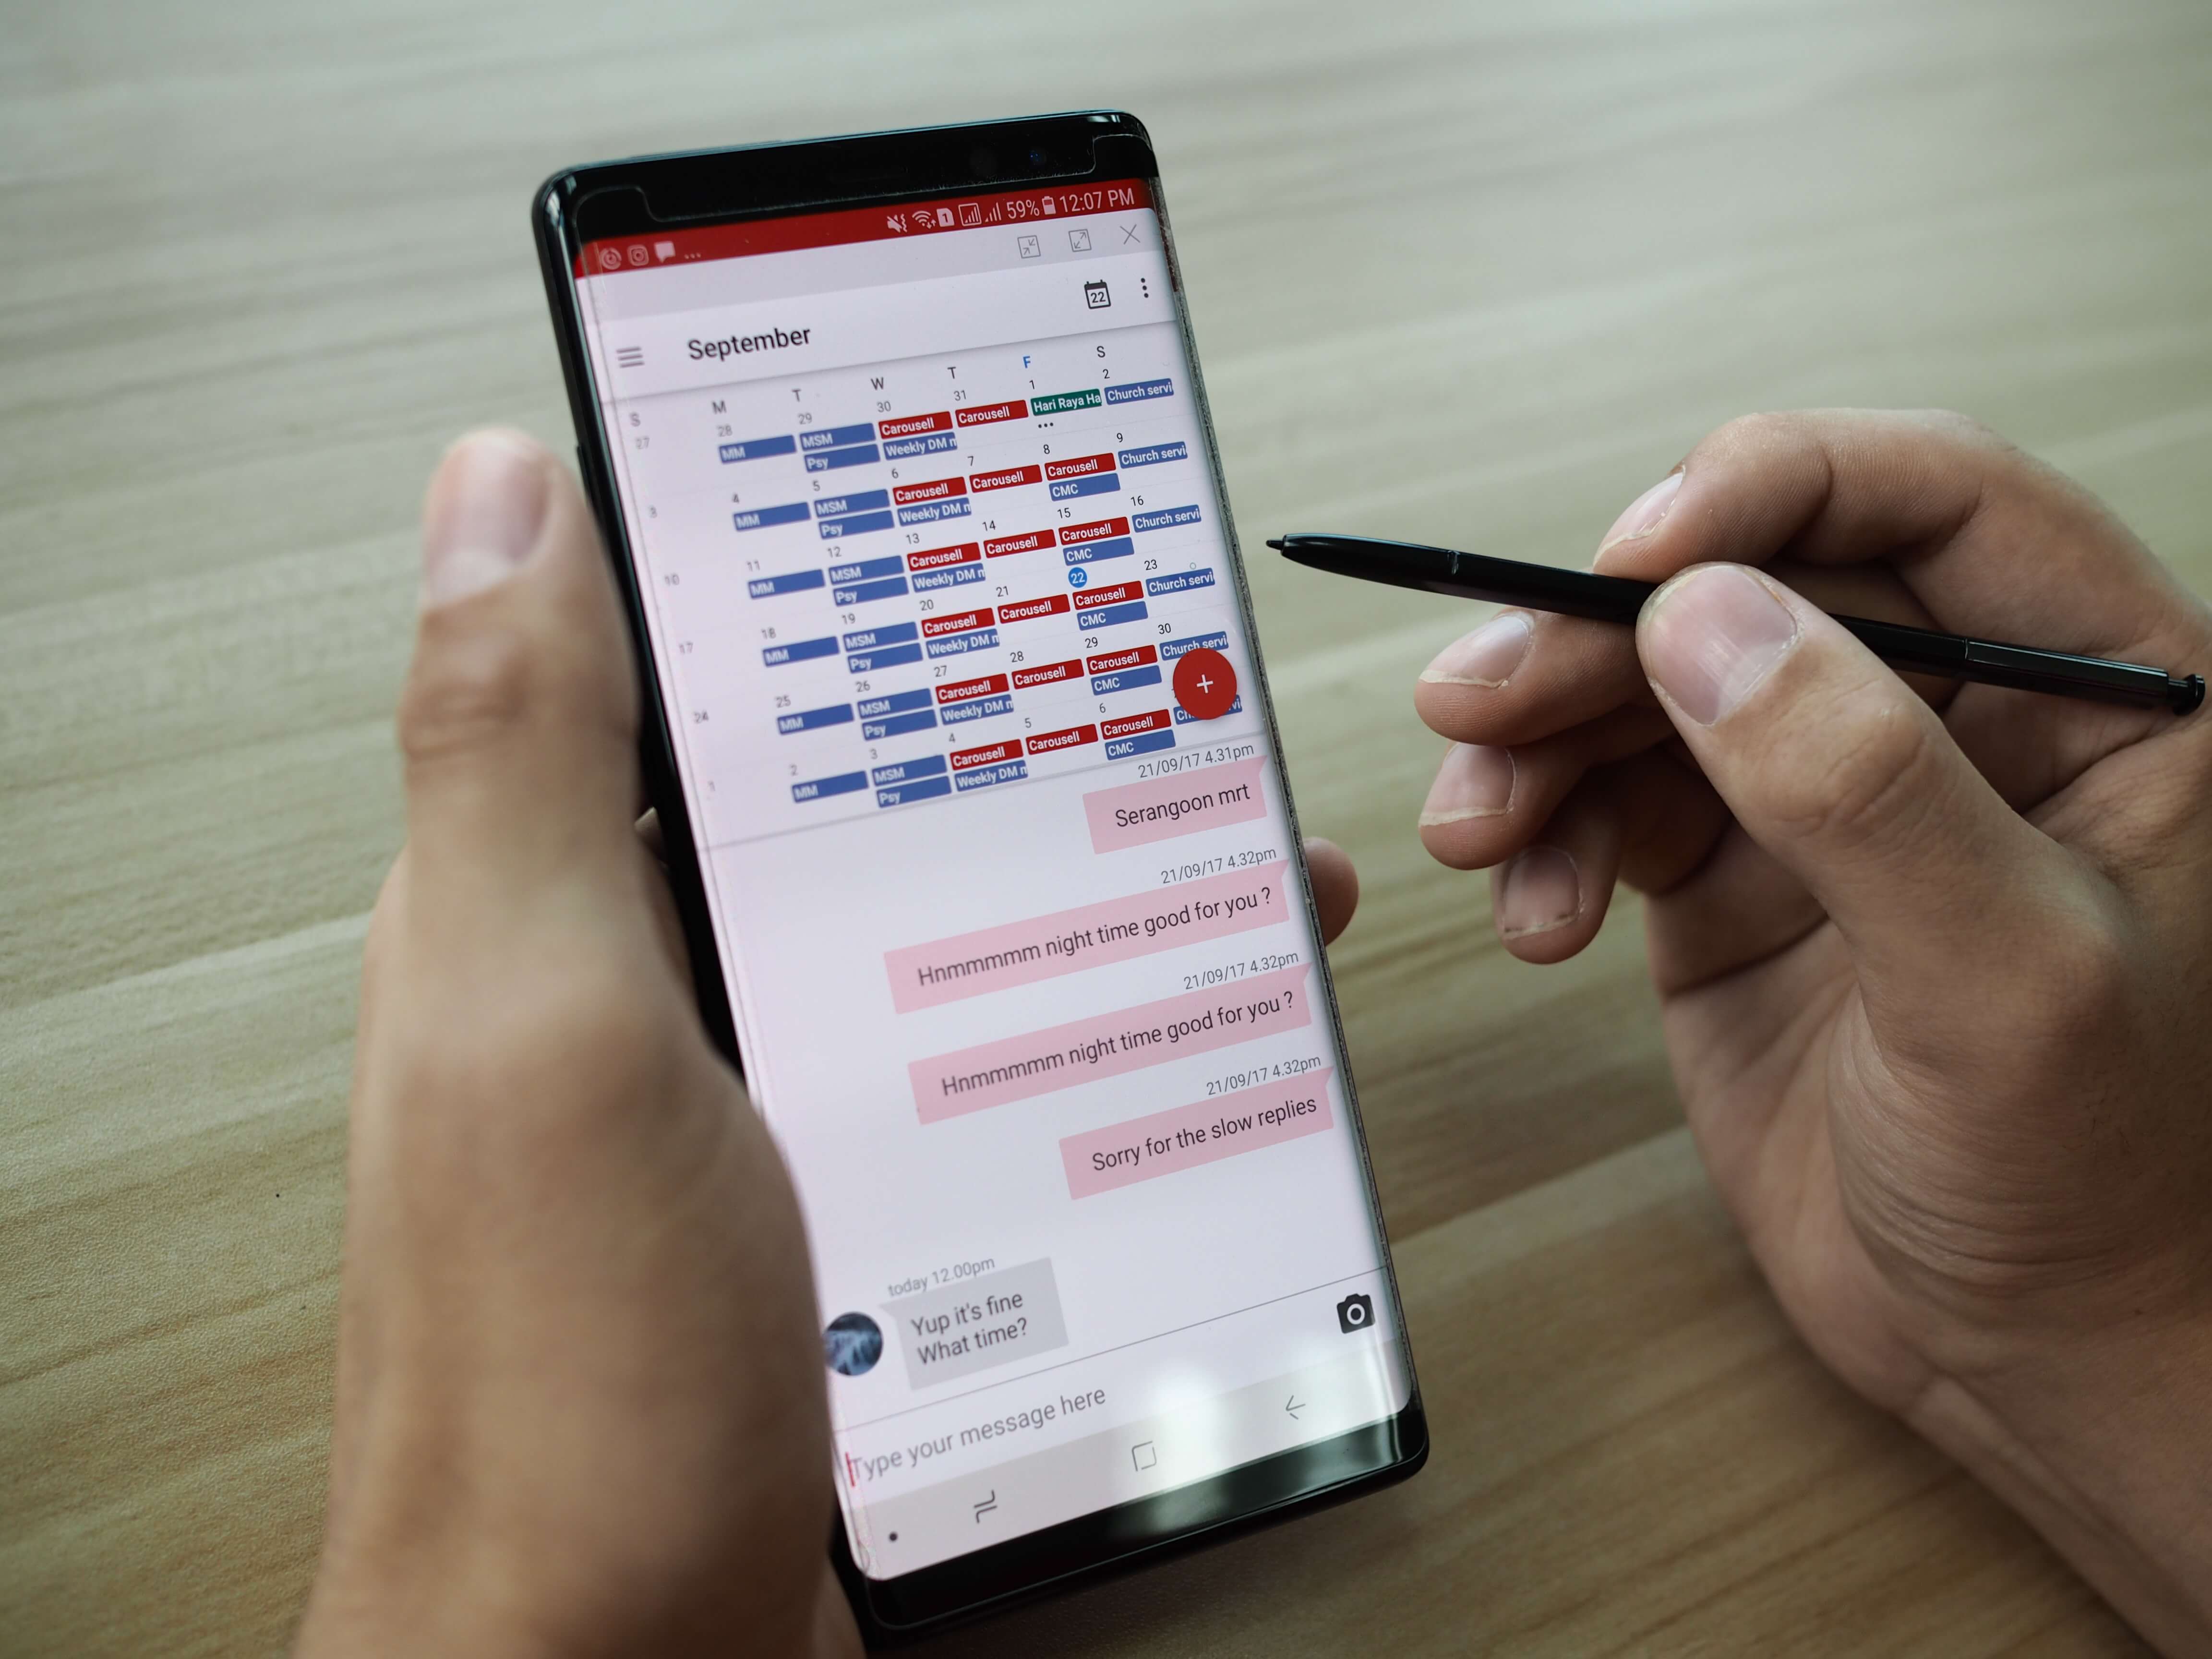 Samsung Galaxy Note 8 S Pen provides you with the convenience and accuracy of touch